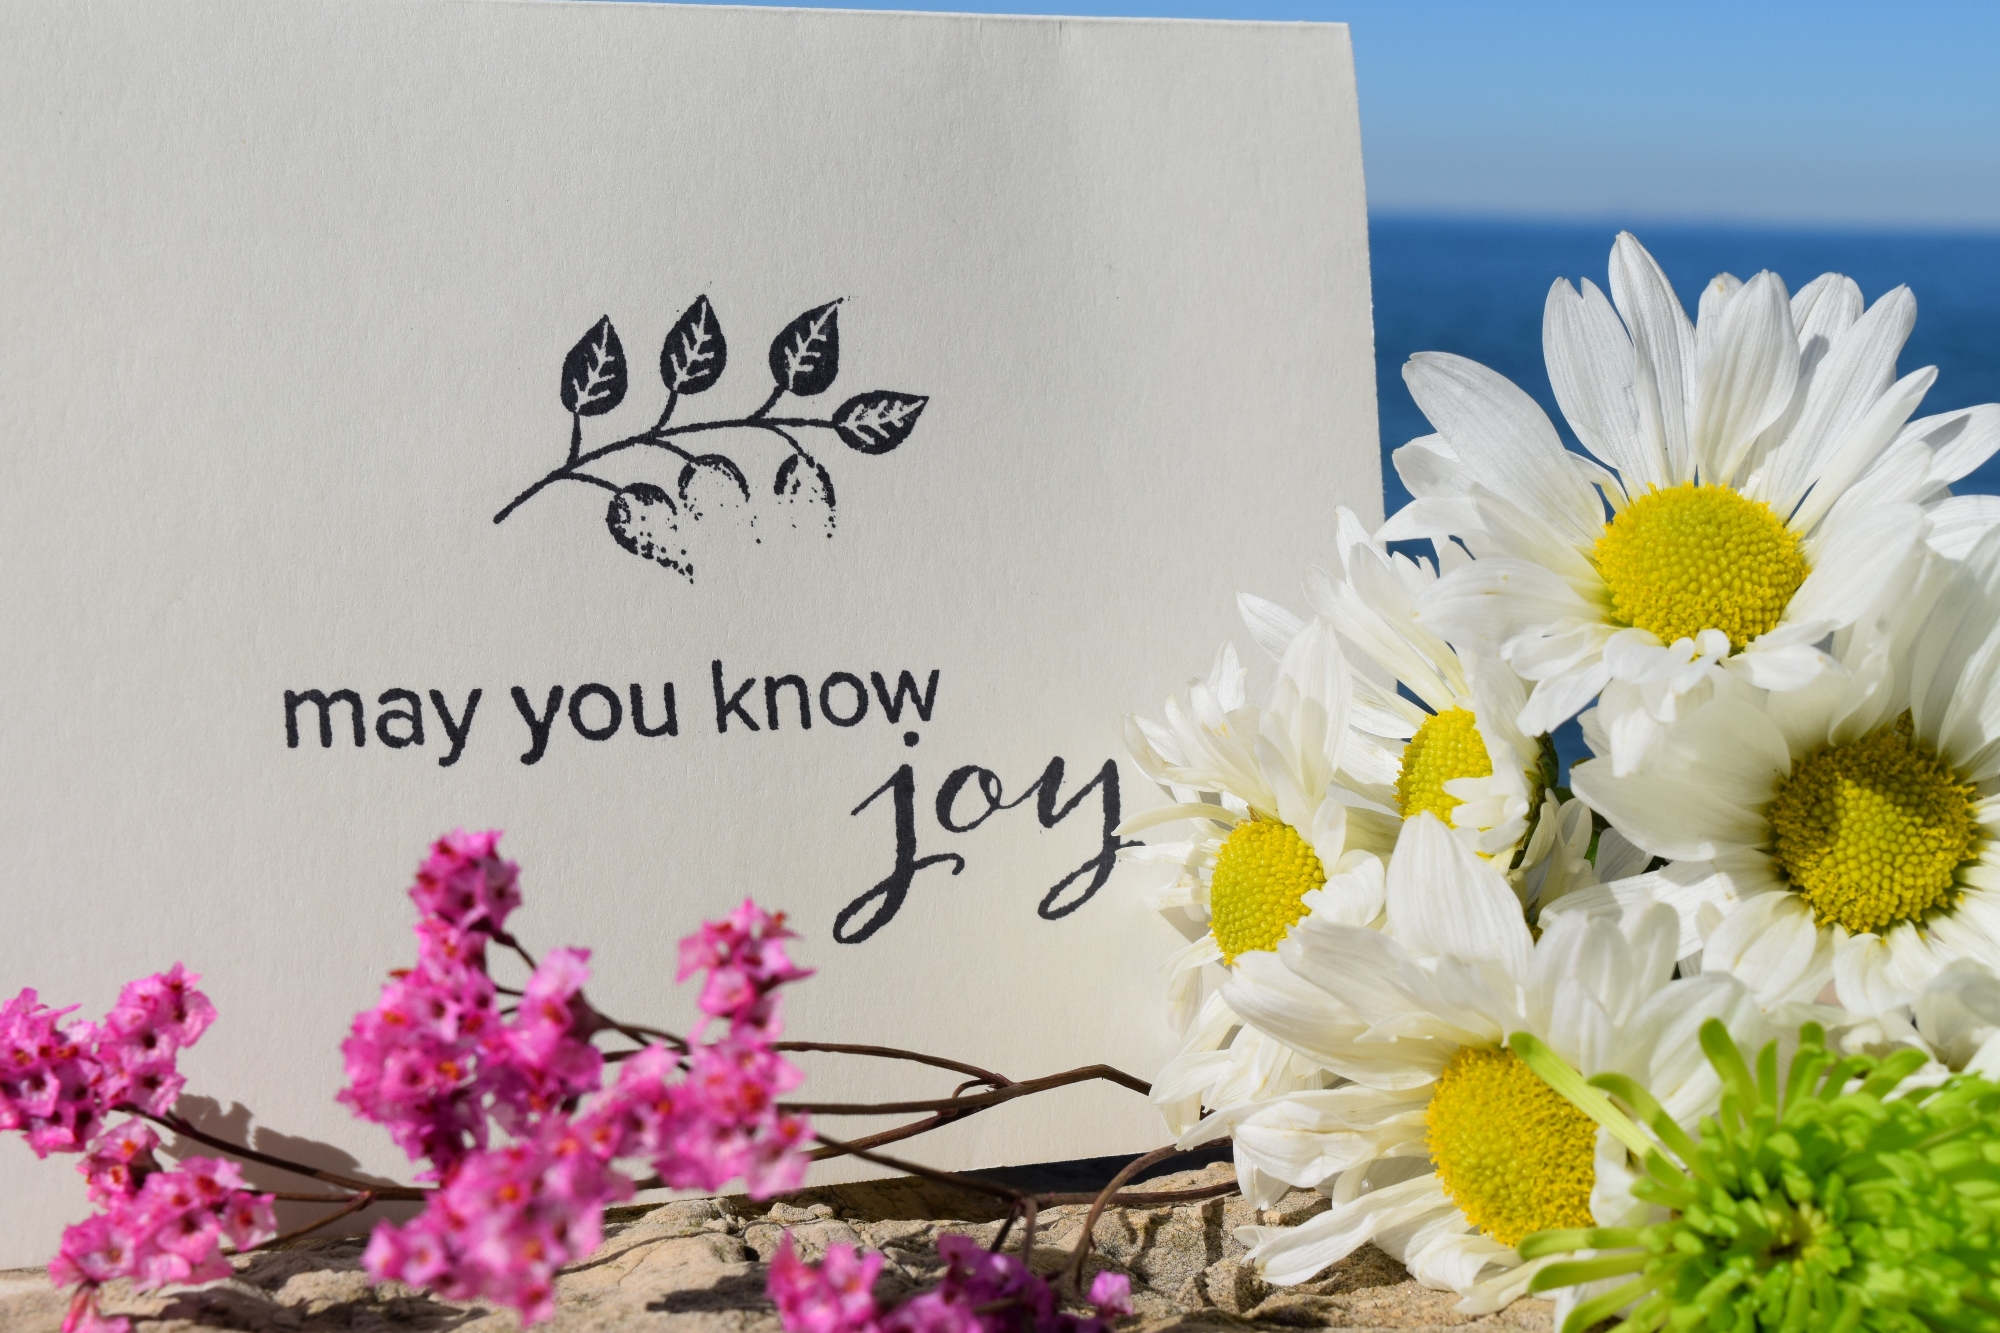 May You Know Joy meditation and intention cards